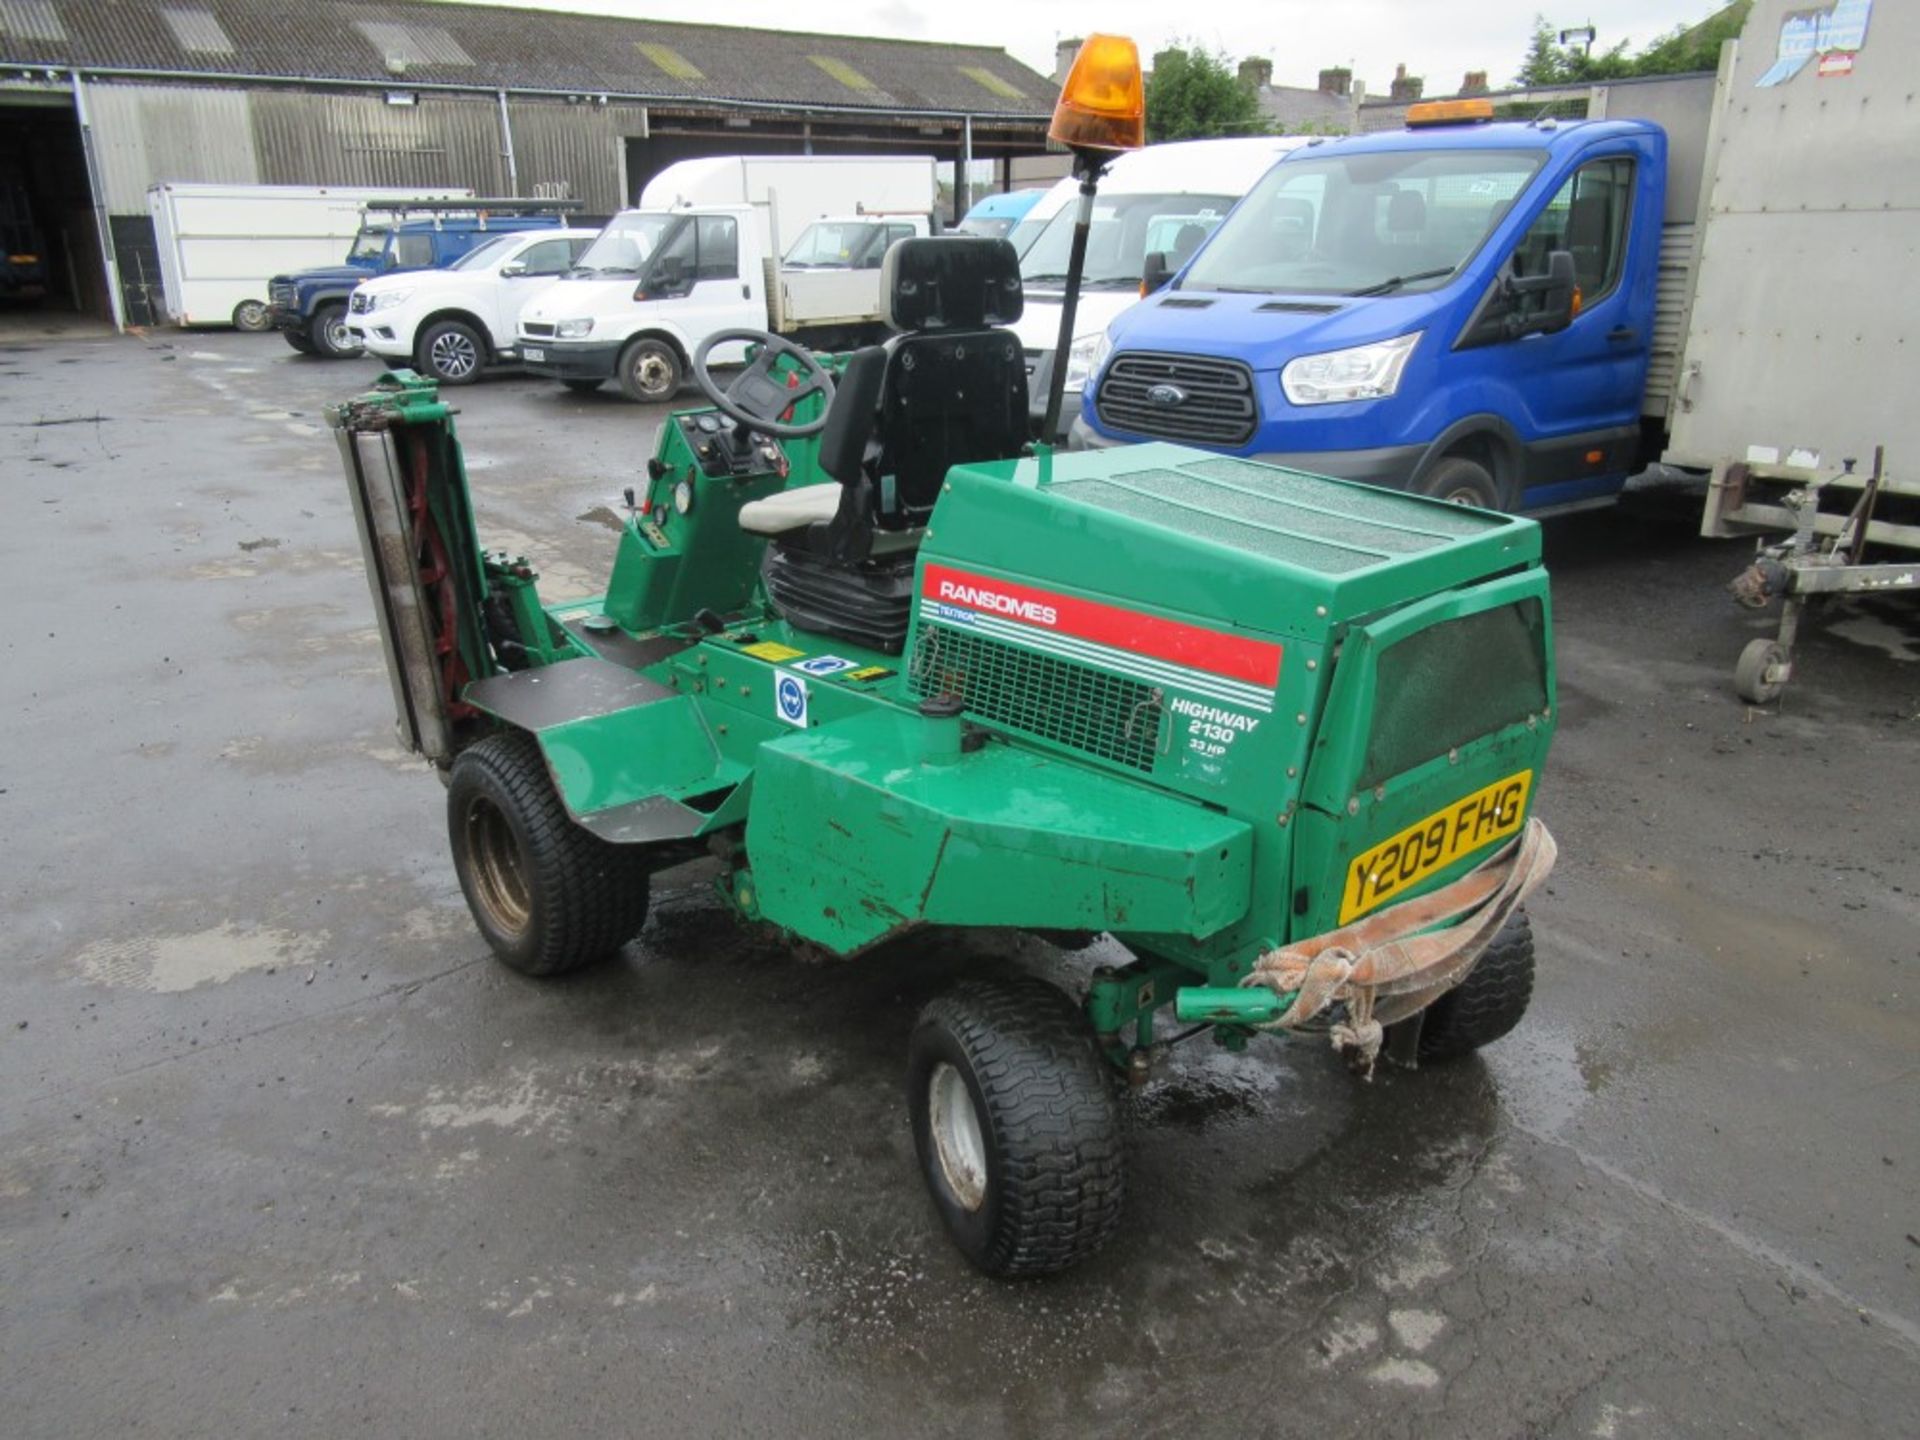 Y reg RANSOMES HIGHWAY 2130 RIDE ON MOWER (DIRECT COUNCIL) 1802 HOURS NOT WARRANTED, NO V5 [+ VAT] - Image 3 of 5